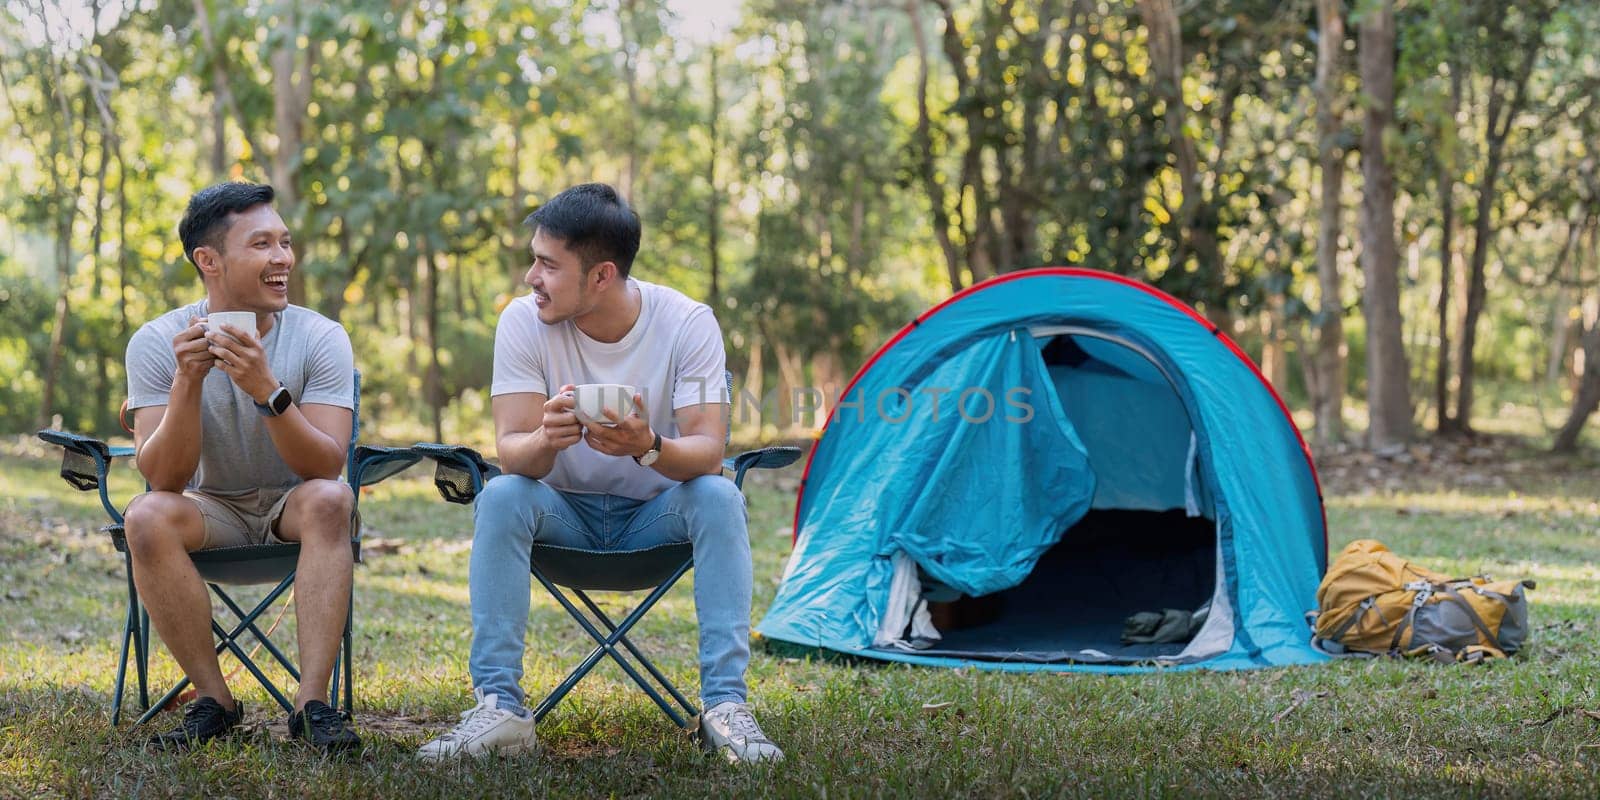 Male gay couple asian traveling with tent camping outdoor and various adventure lifestyle hiking active summer vacation by nateemee